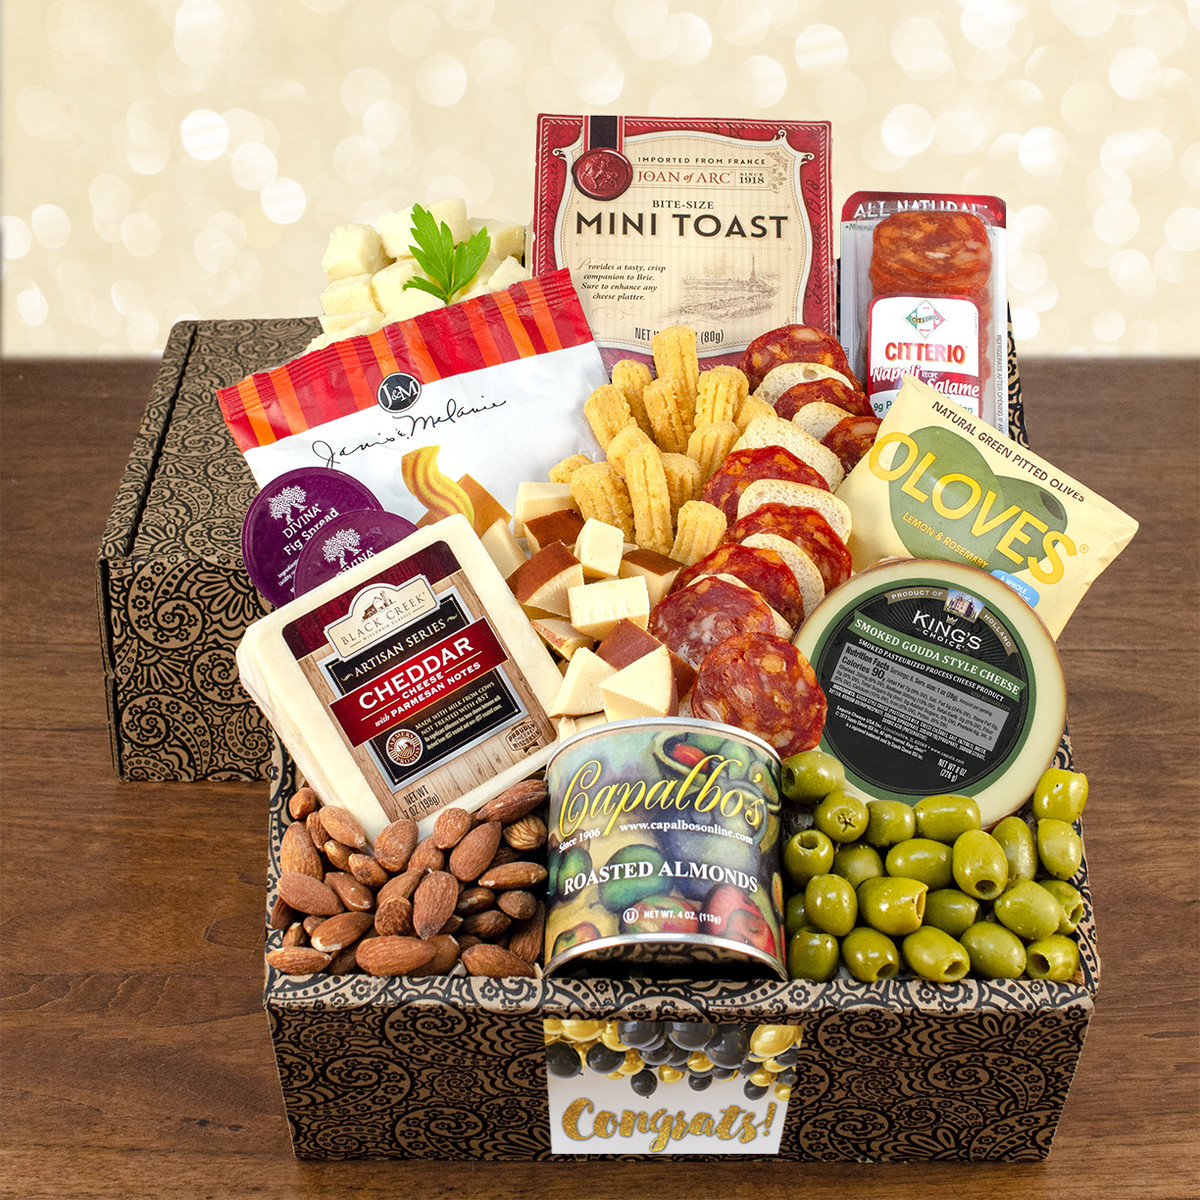 Capalbos Cheese and Crackers Classic Collection Gift Box - Congratulations